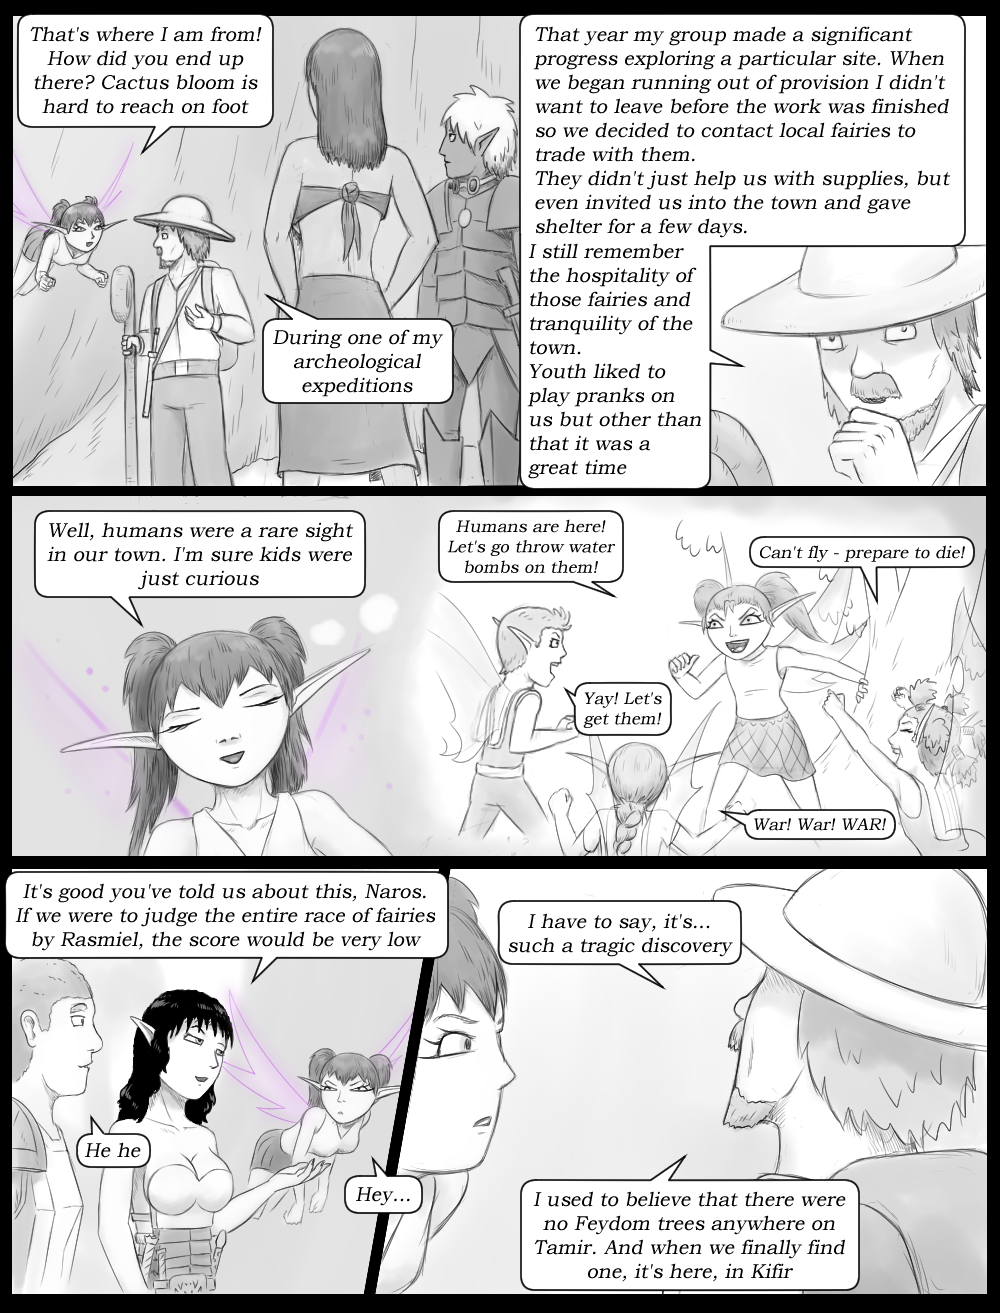 Page 6 - the Good and the Bad Sides of Fairies